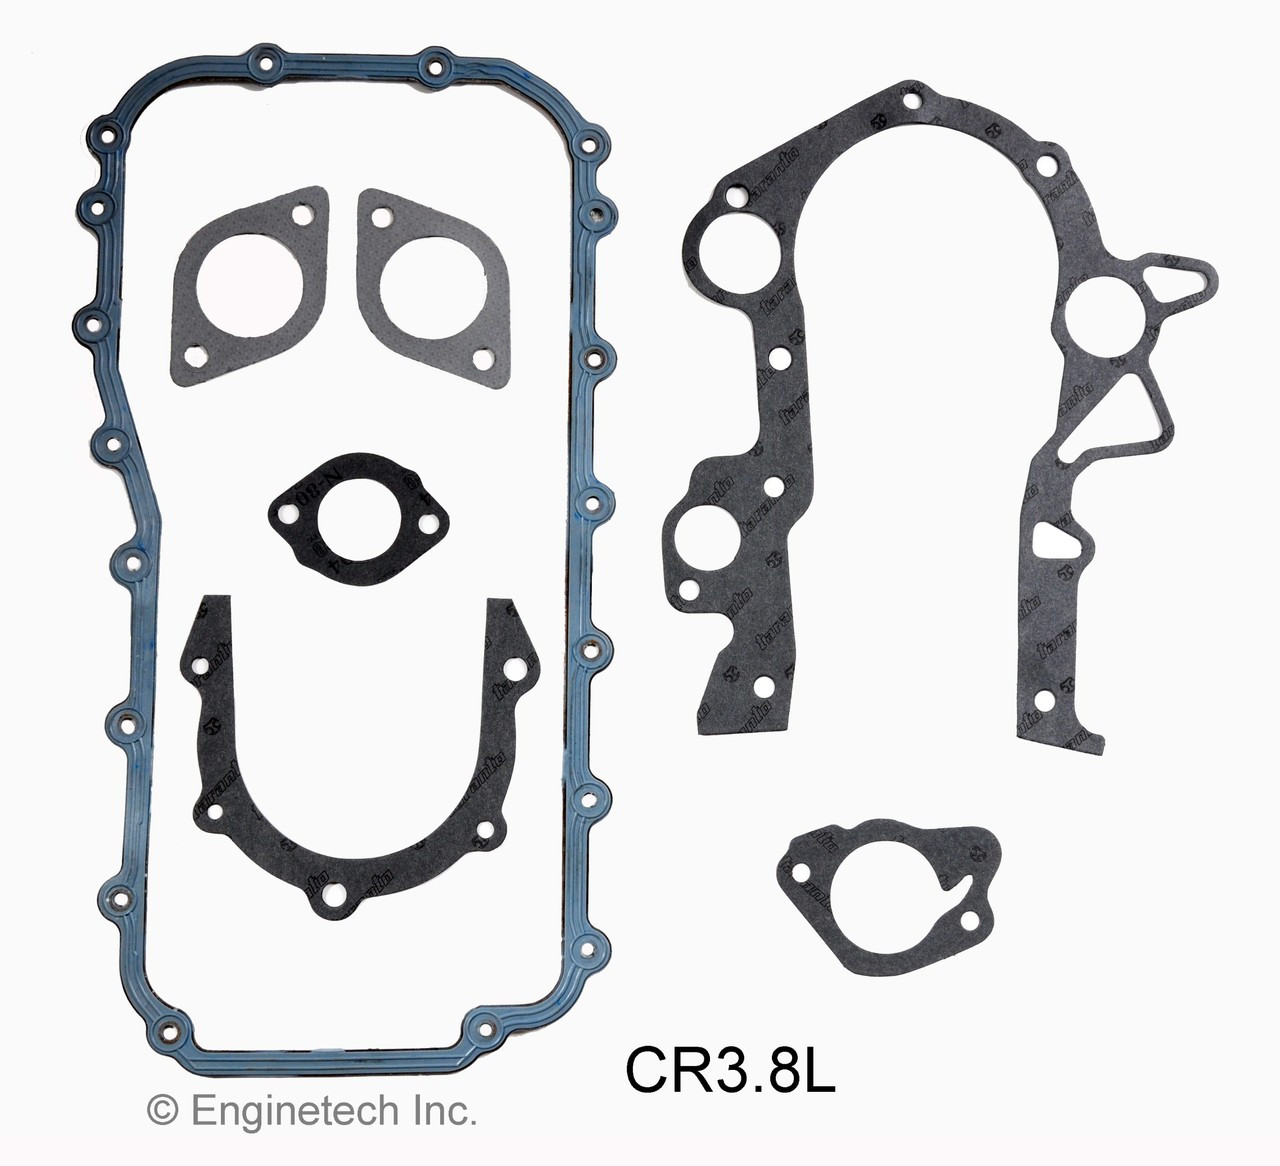 1999 Plymouth Voyager 3.8L Engine Gasket Set CR3.8L -26